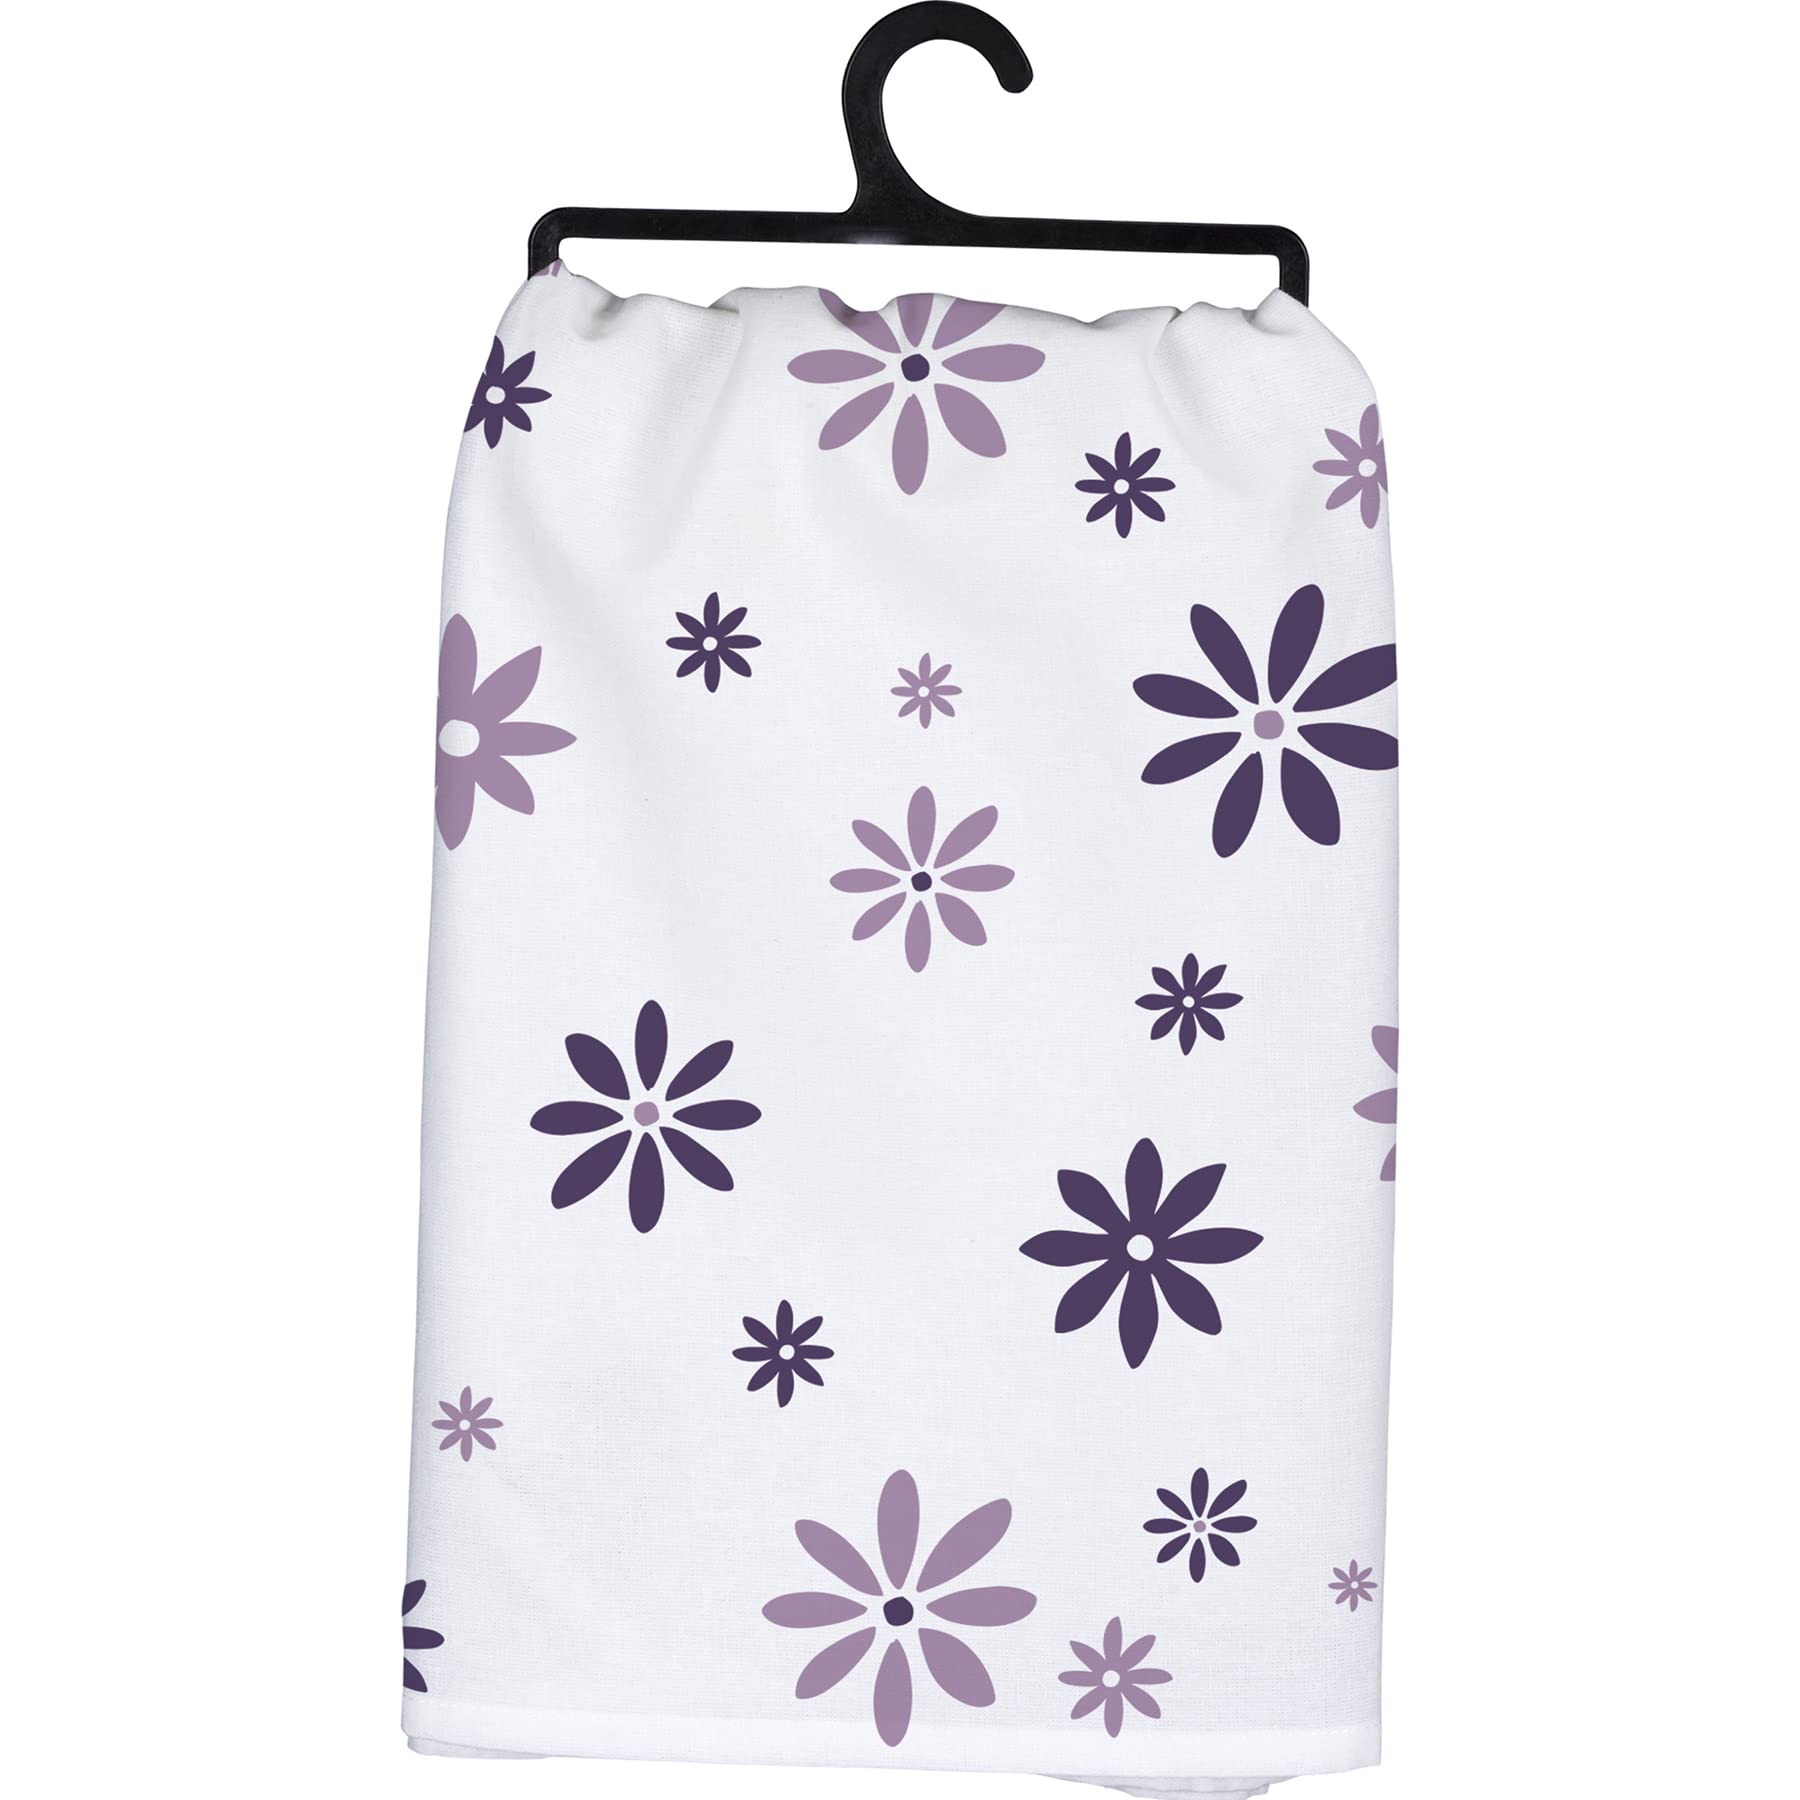 Primitives by Kathy This Towel Belongs to an ... Awesome Daughter Decorative Kitchen Towel